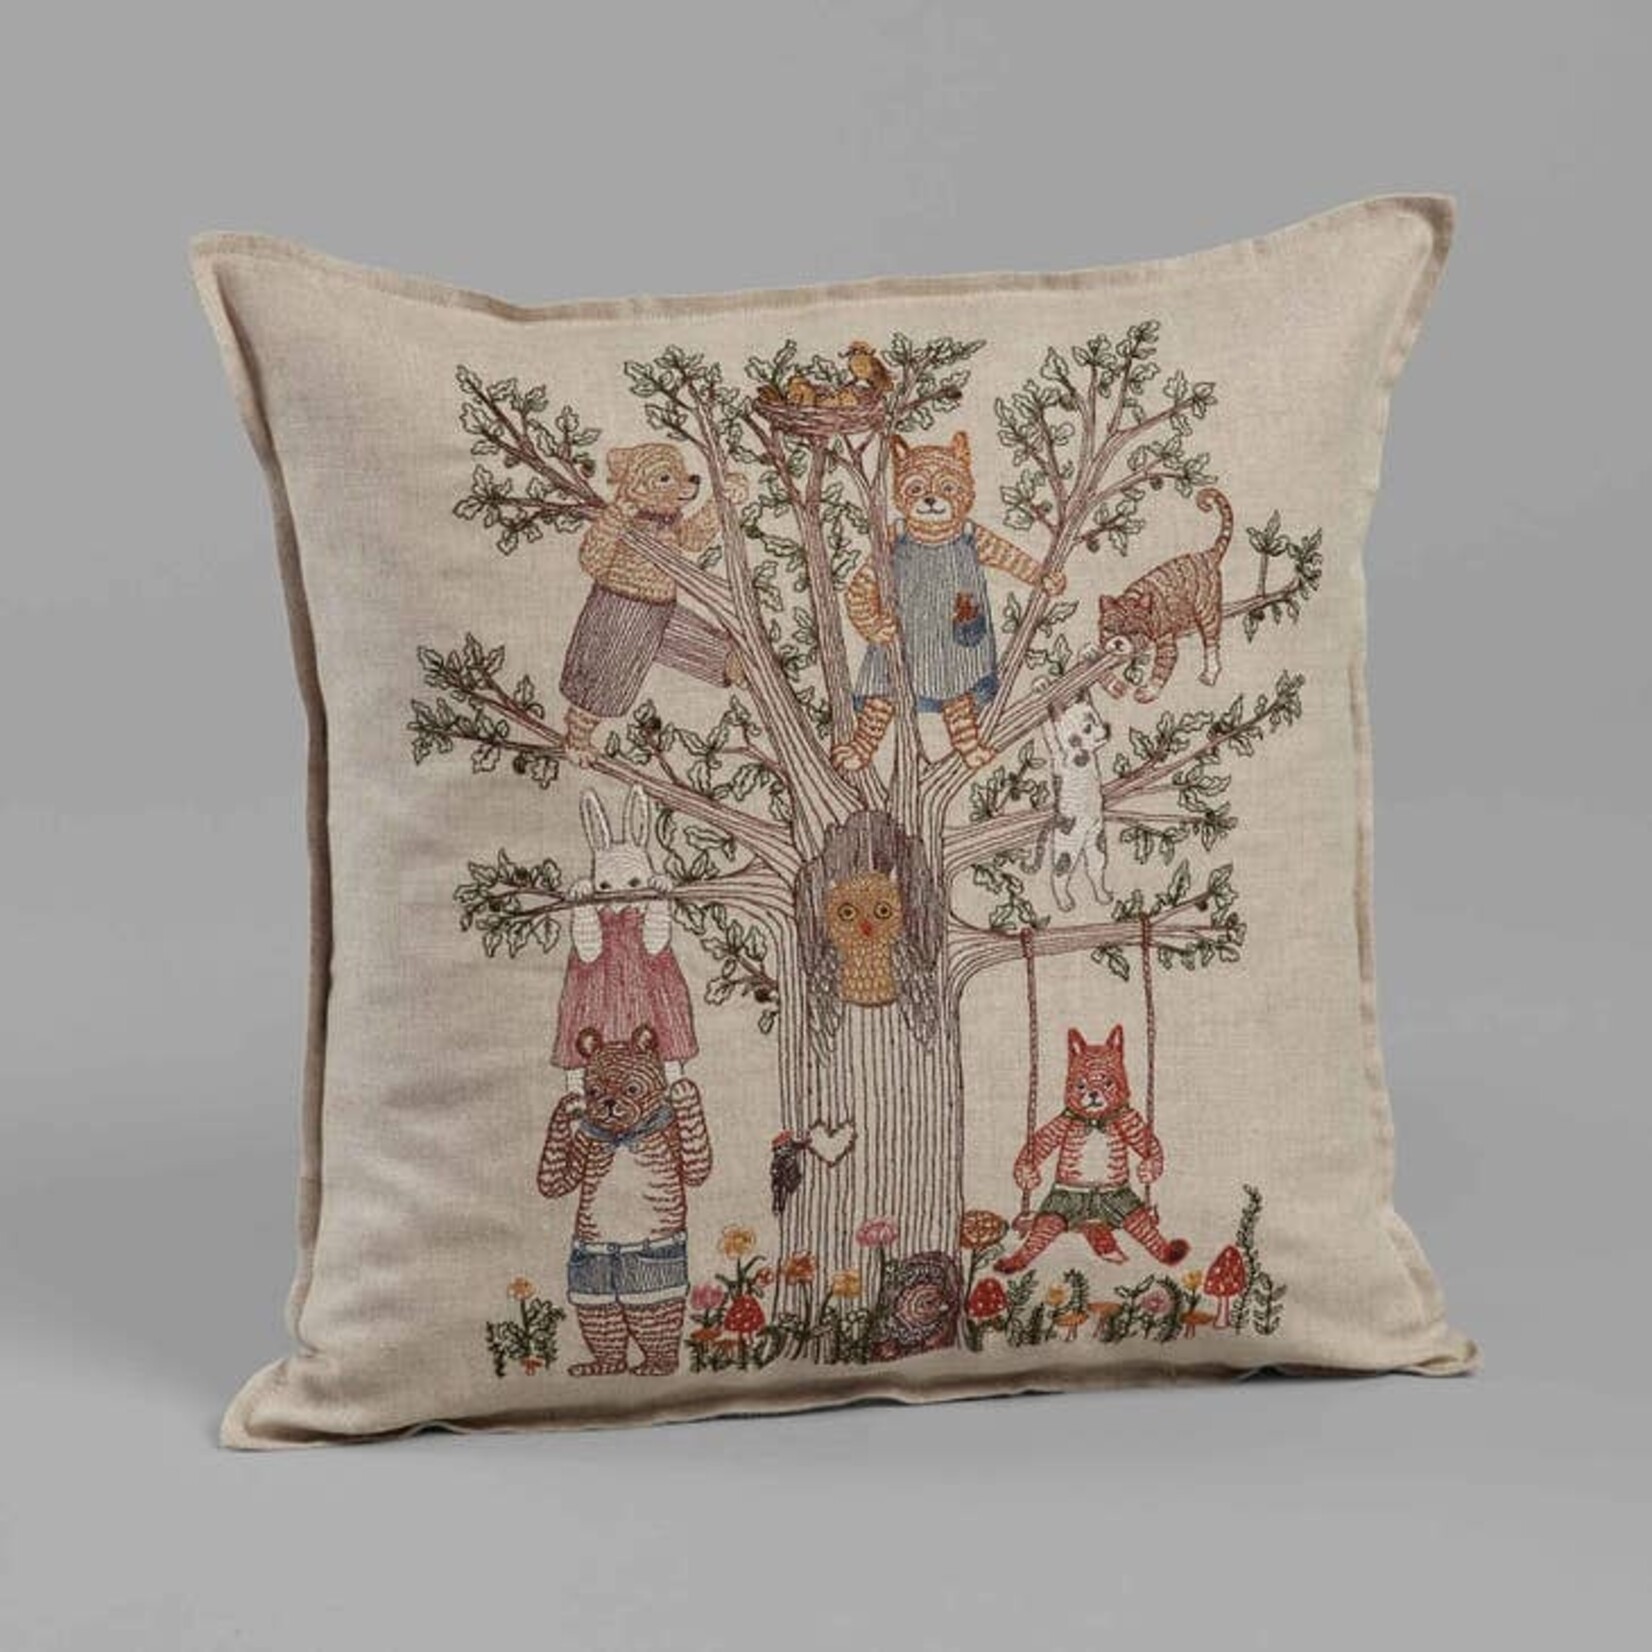 Pillows - Embroidered Tree Of Fun Pillow